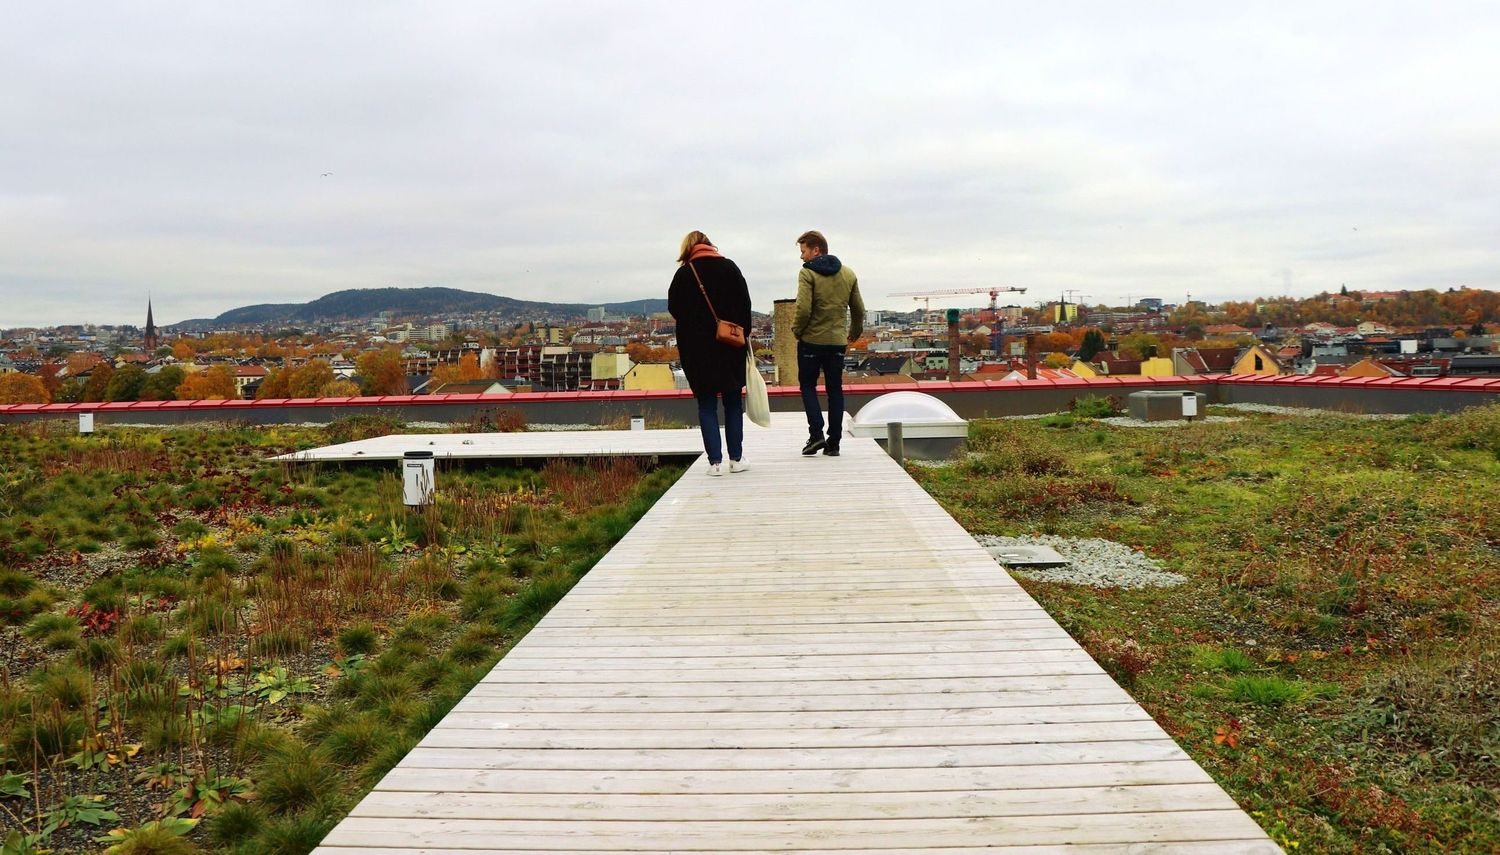 Oslo's climate strategy: green roofs